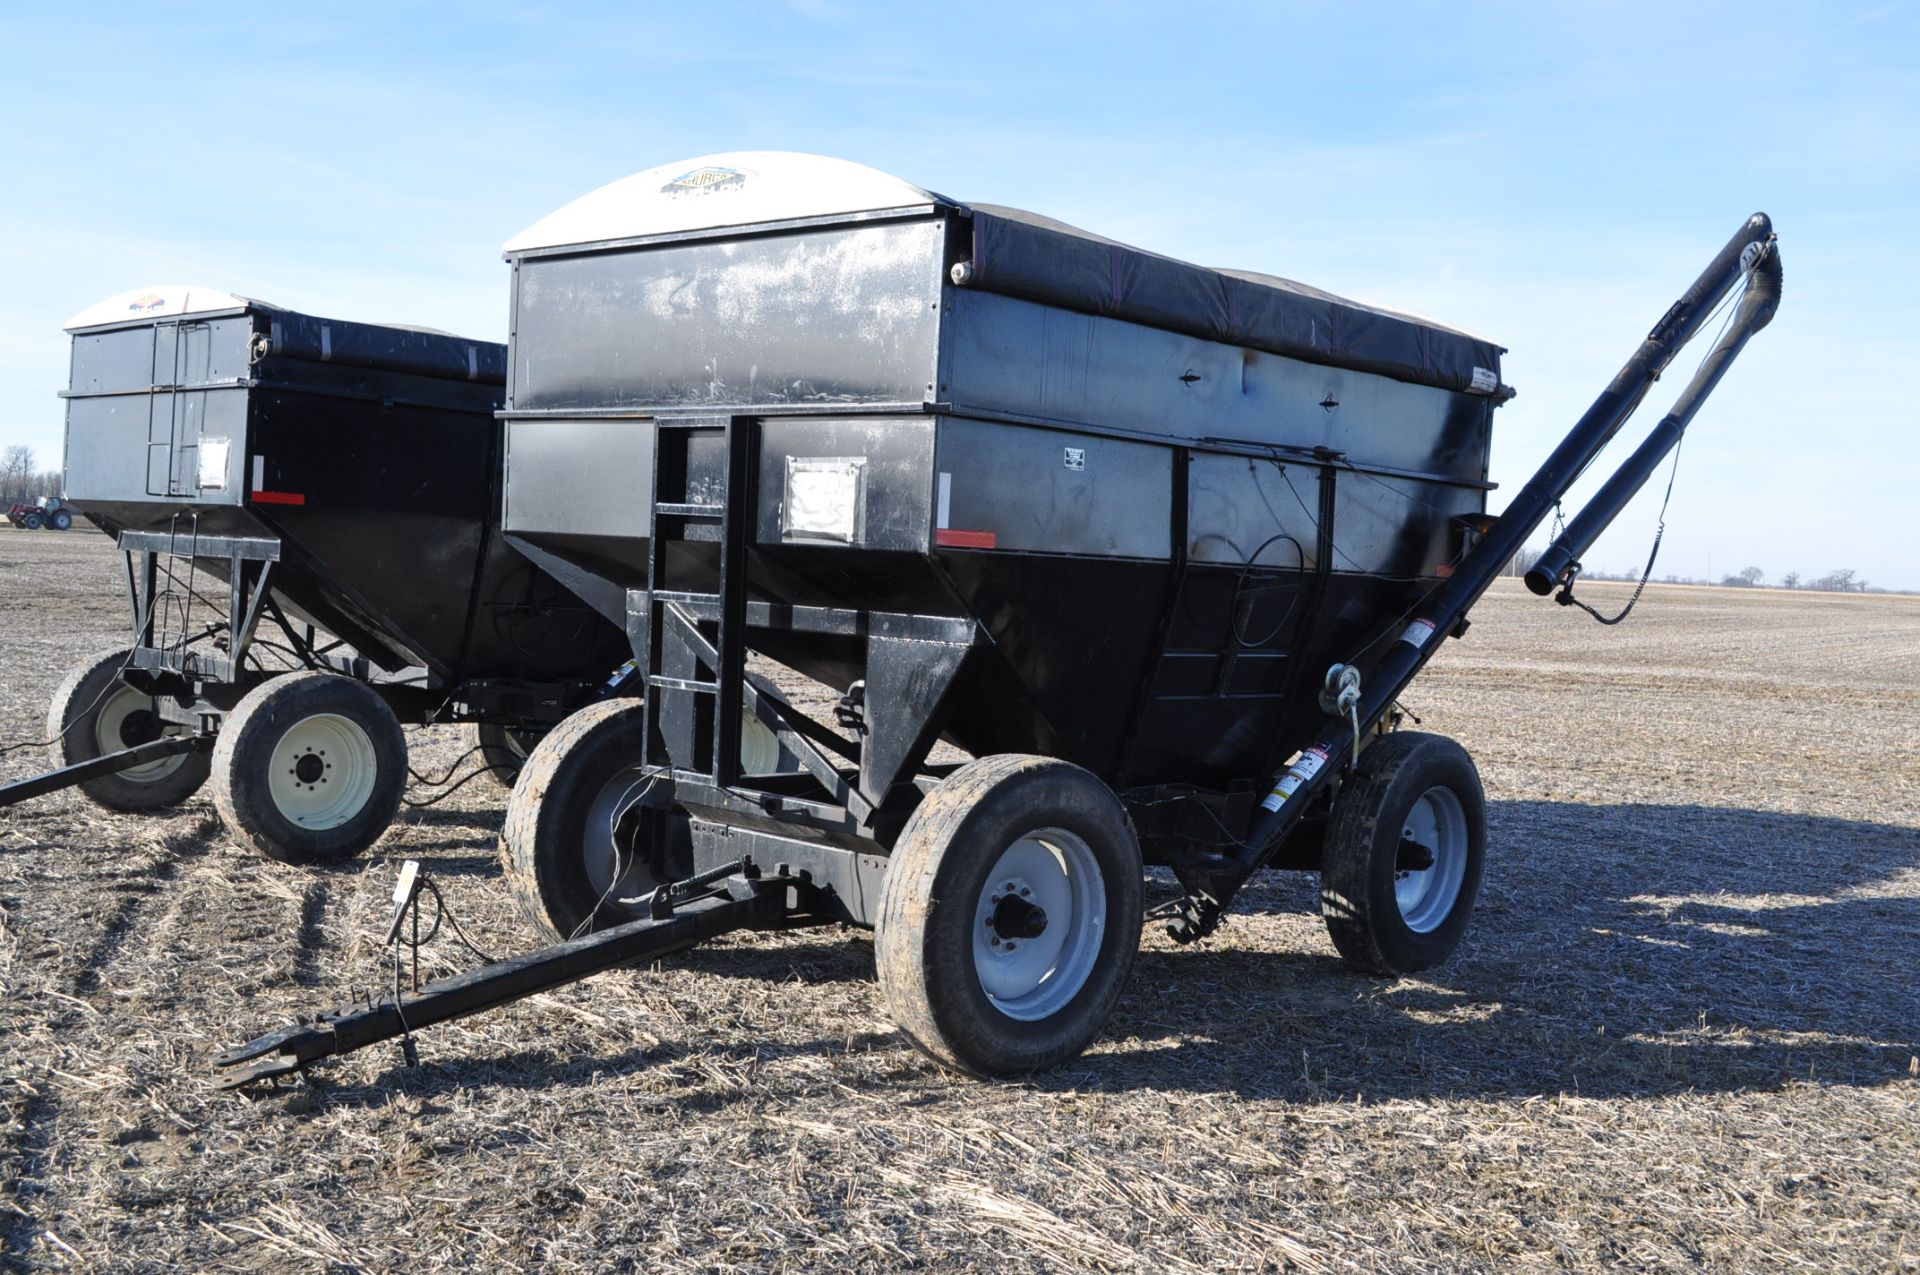 J & M 350 gravity seed wagon, 11 R 24.5 tires, 15’ poly cup auger, 3 section spout, Augermate hyd